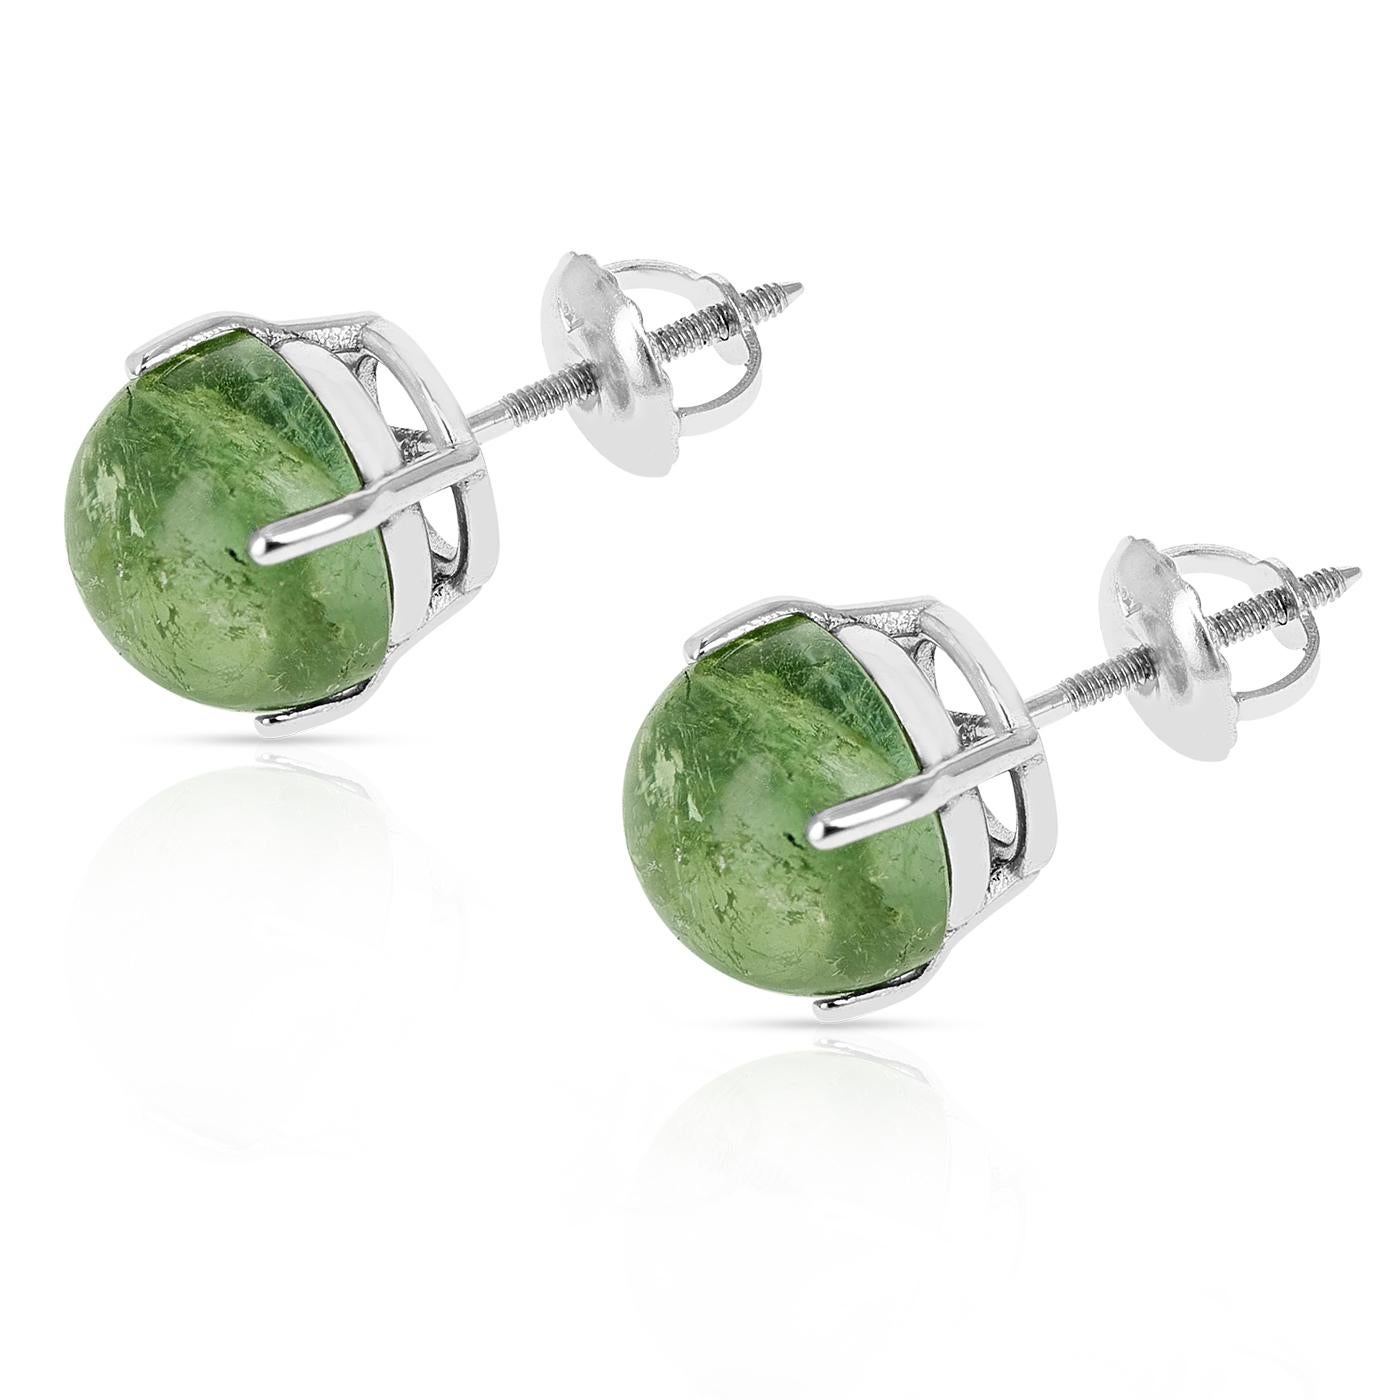 Round Cut Green Tourmaline Round Cabochon Stud Earrings Made in 14 Karat White Gold